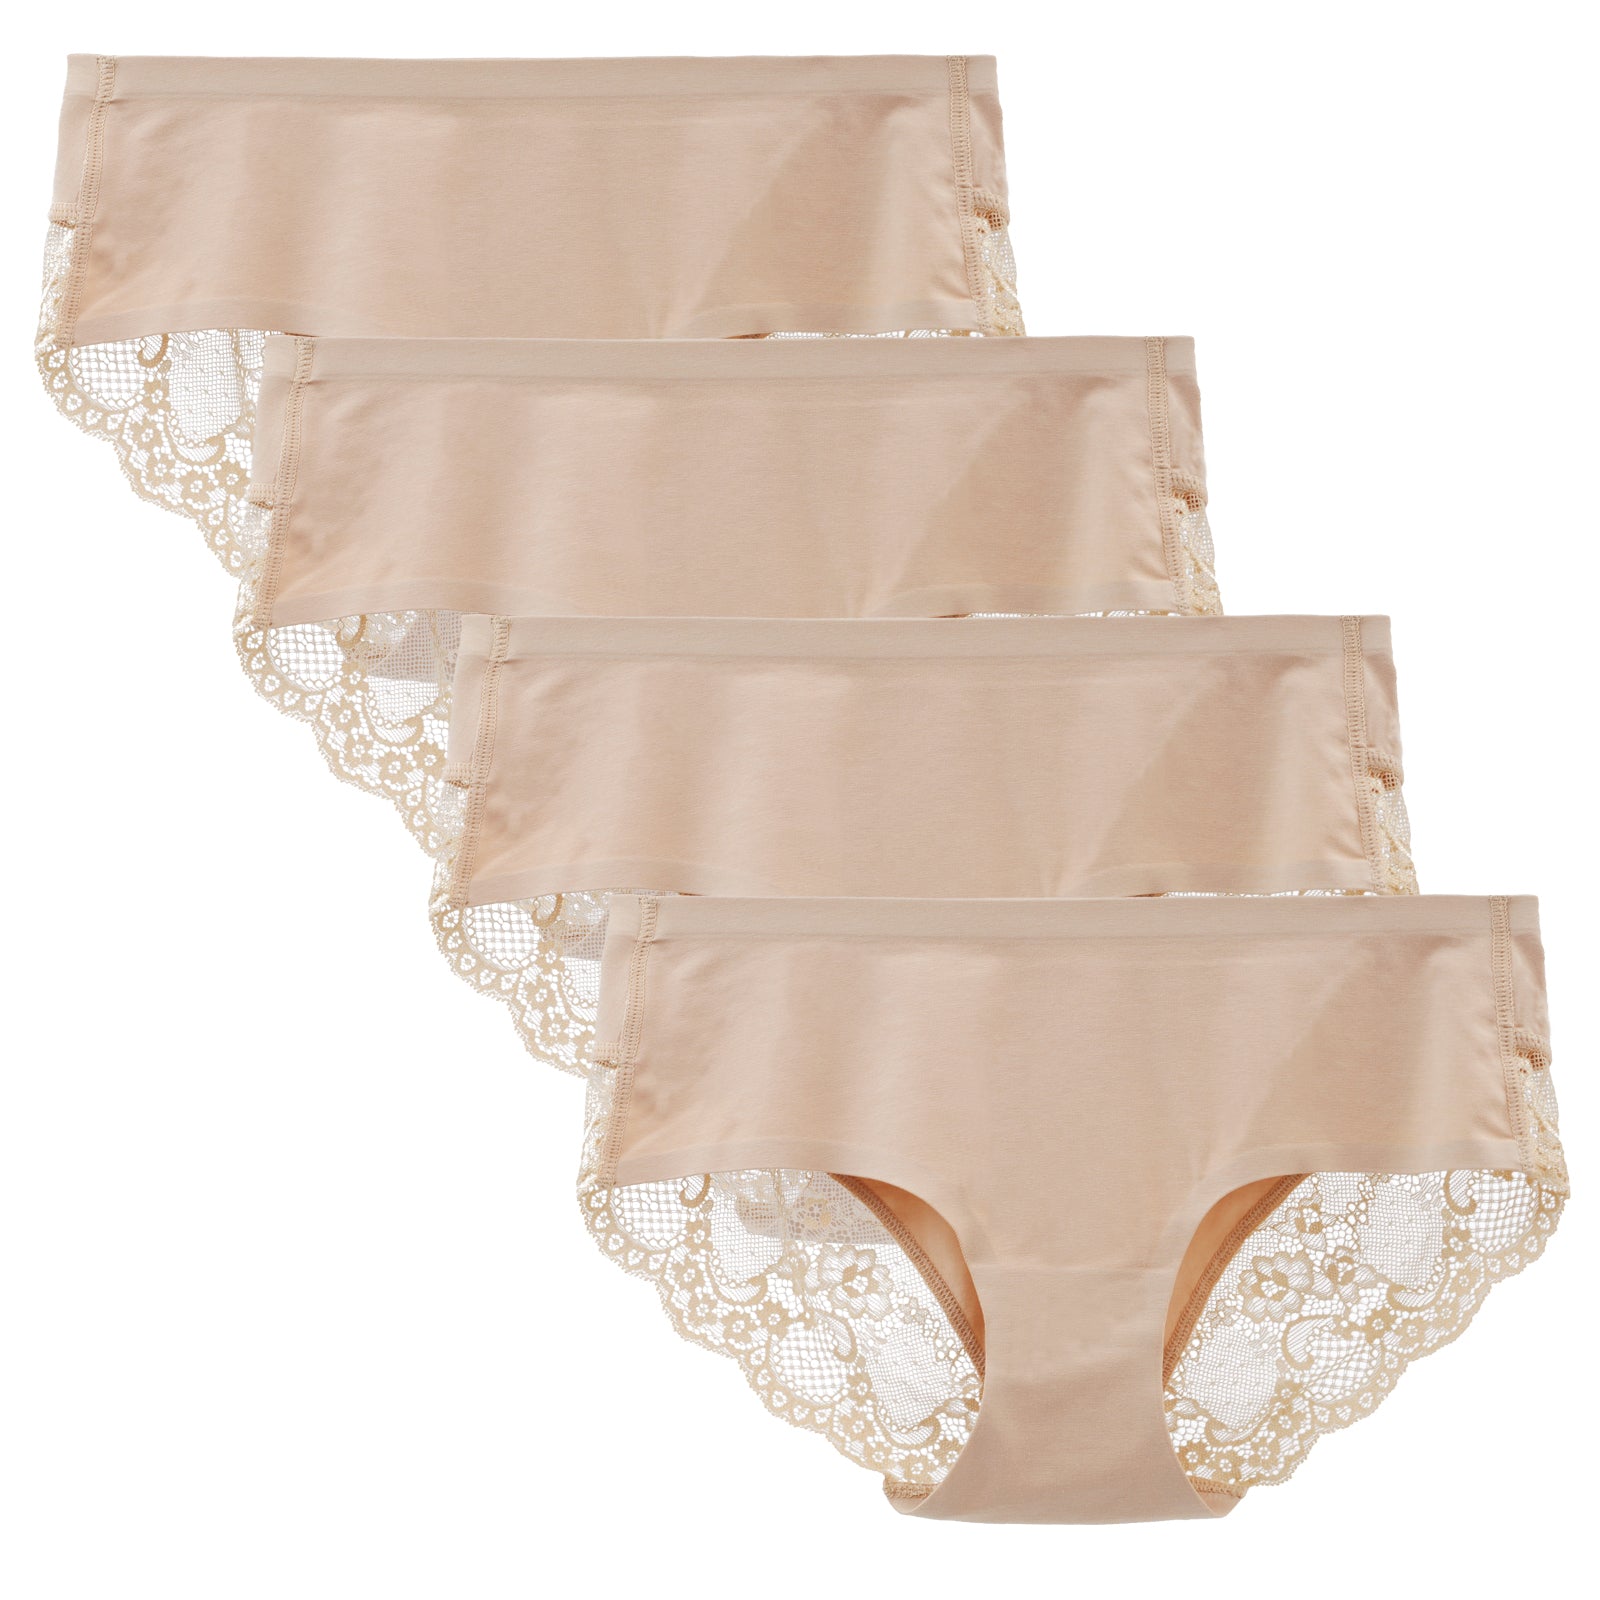 LIQQY Women's 4 Pack Cotton Lace Coverage Seamless Brief Panty